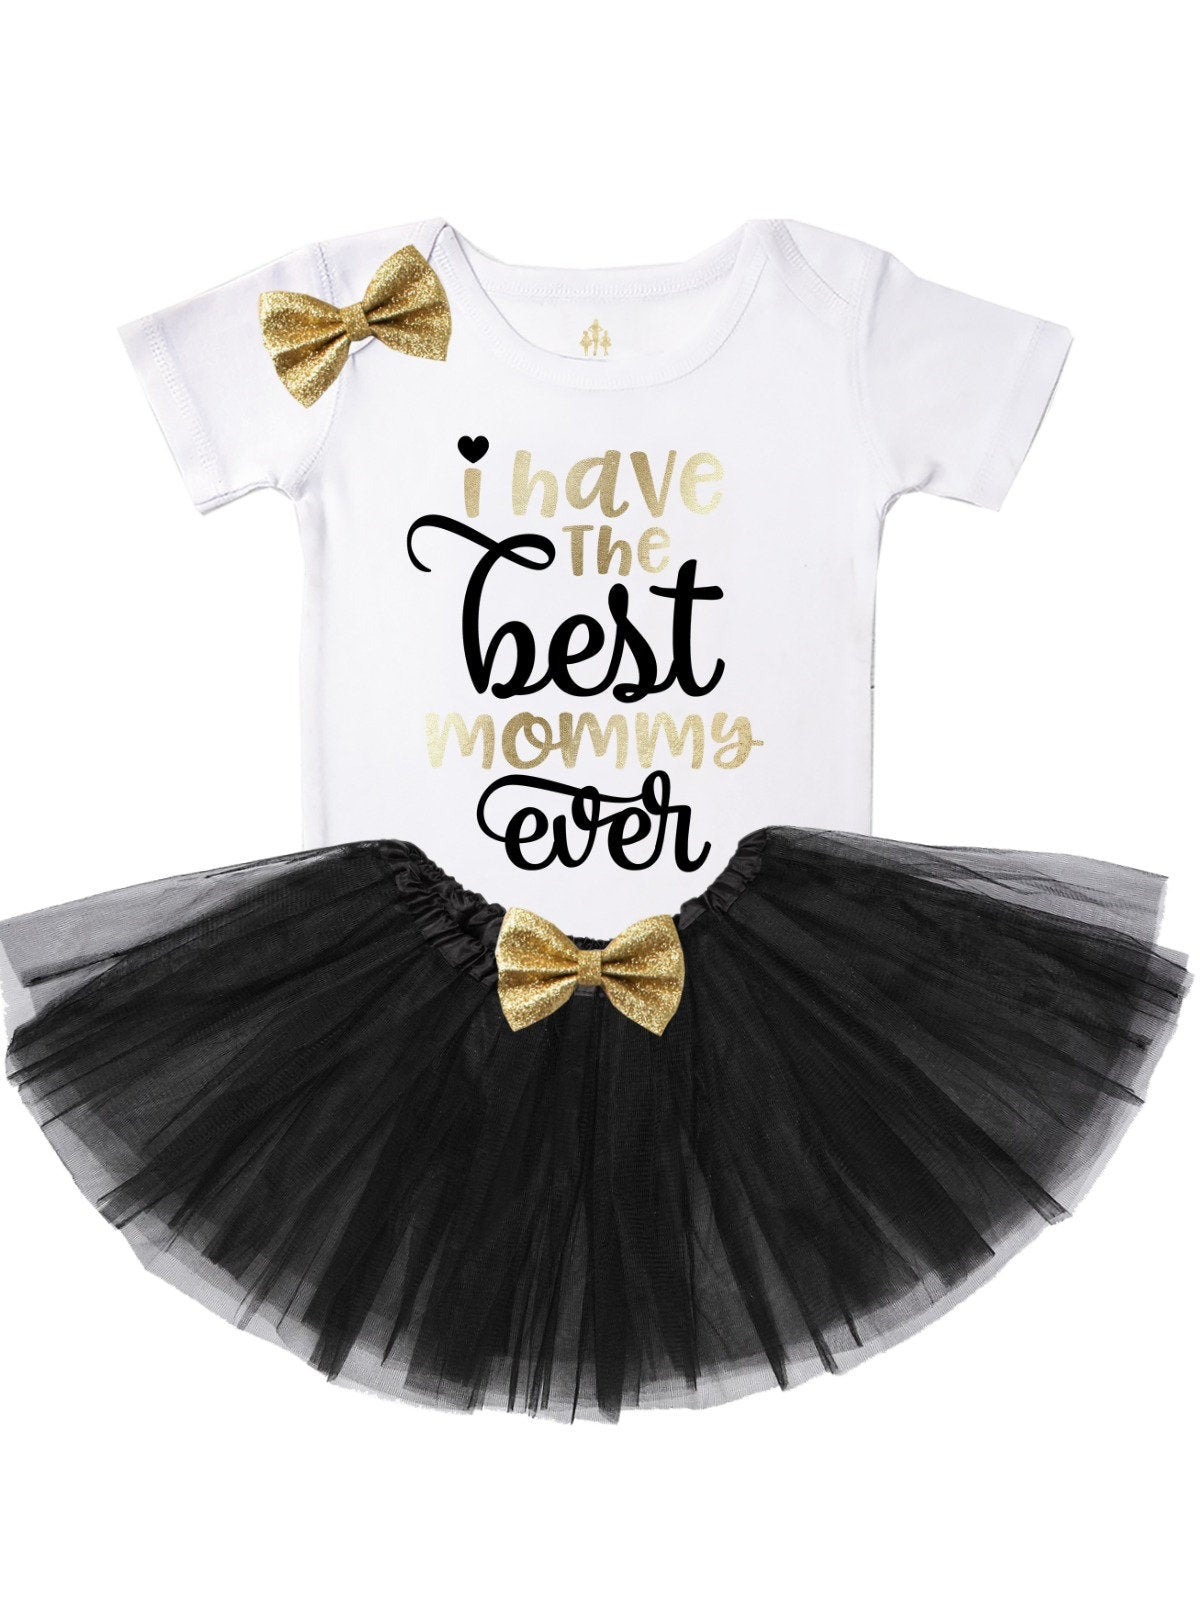 I have the best mommy ever tutu outfit